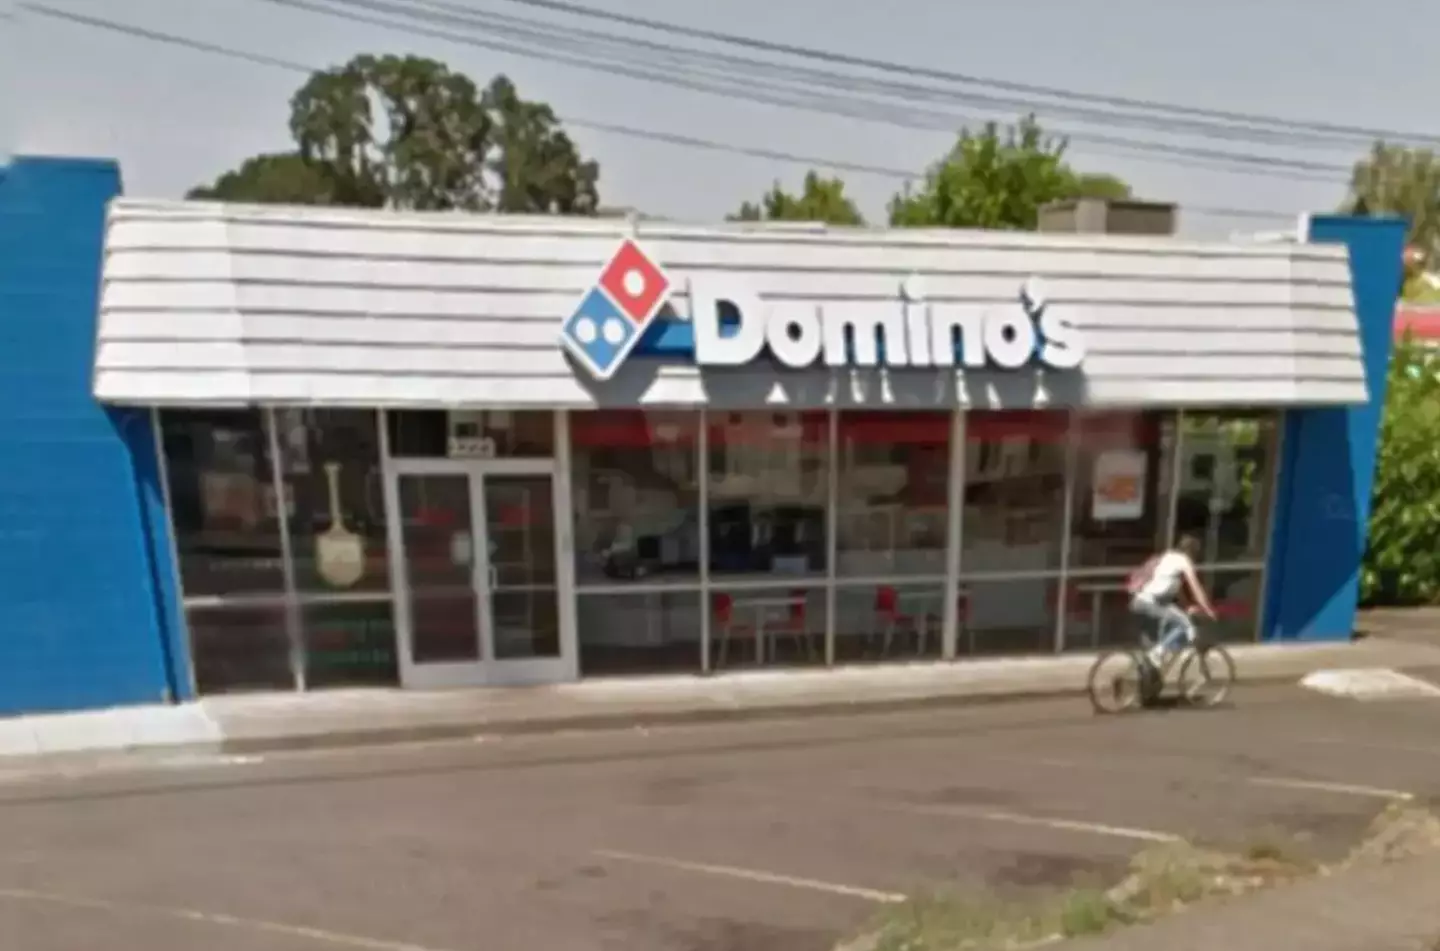 The Domino's where Kirk ate all the pizza.